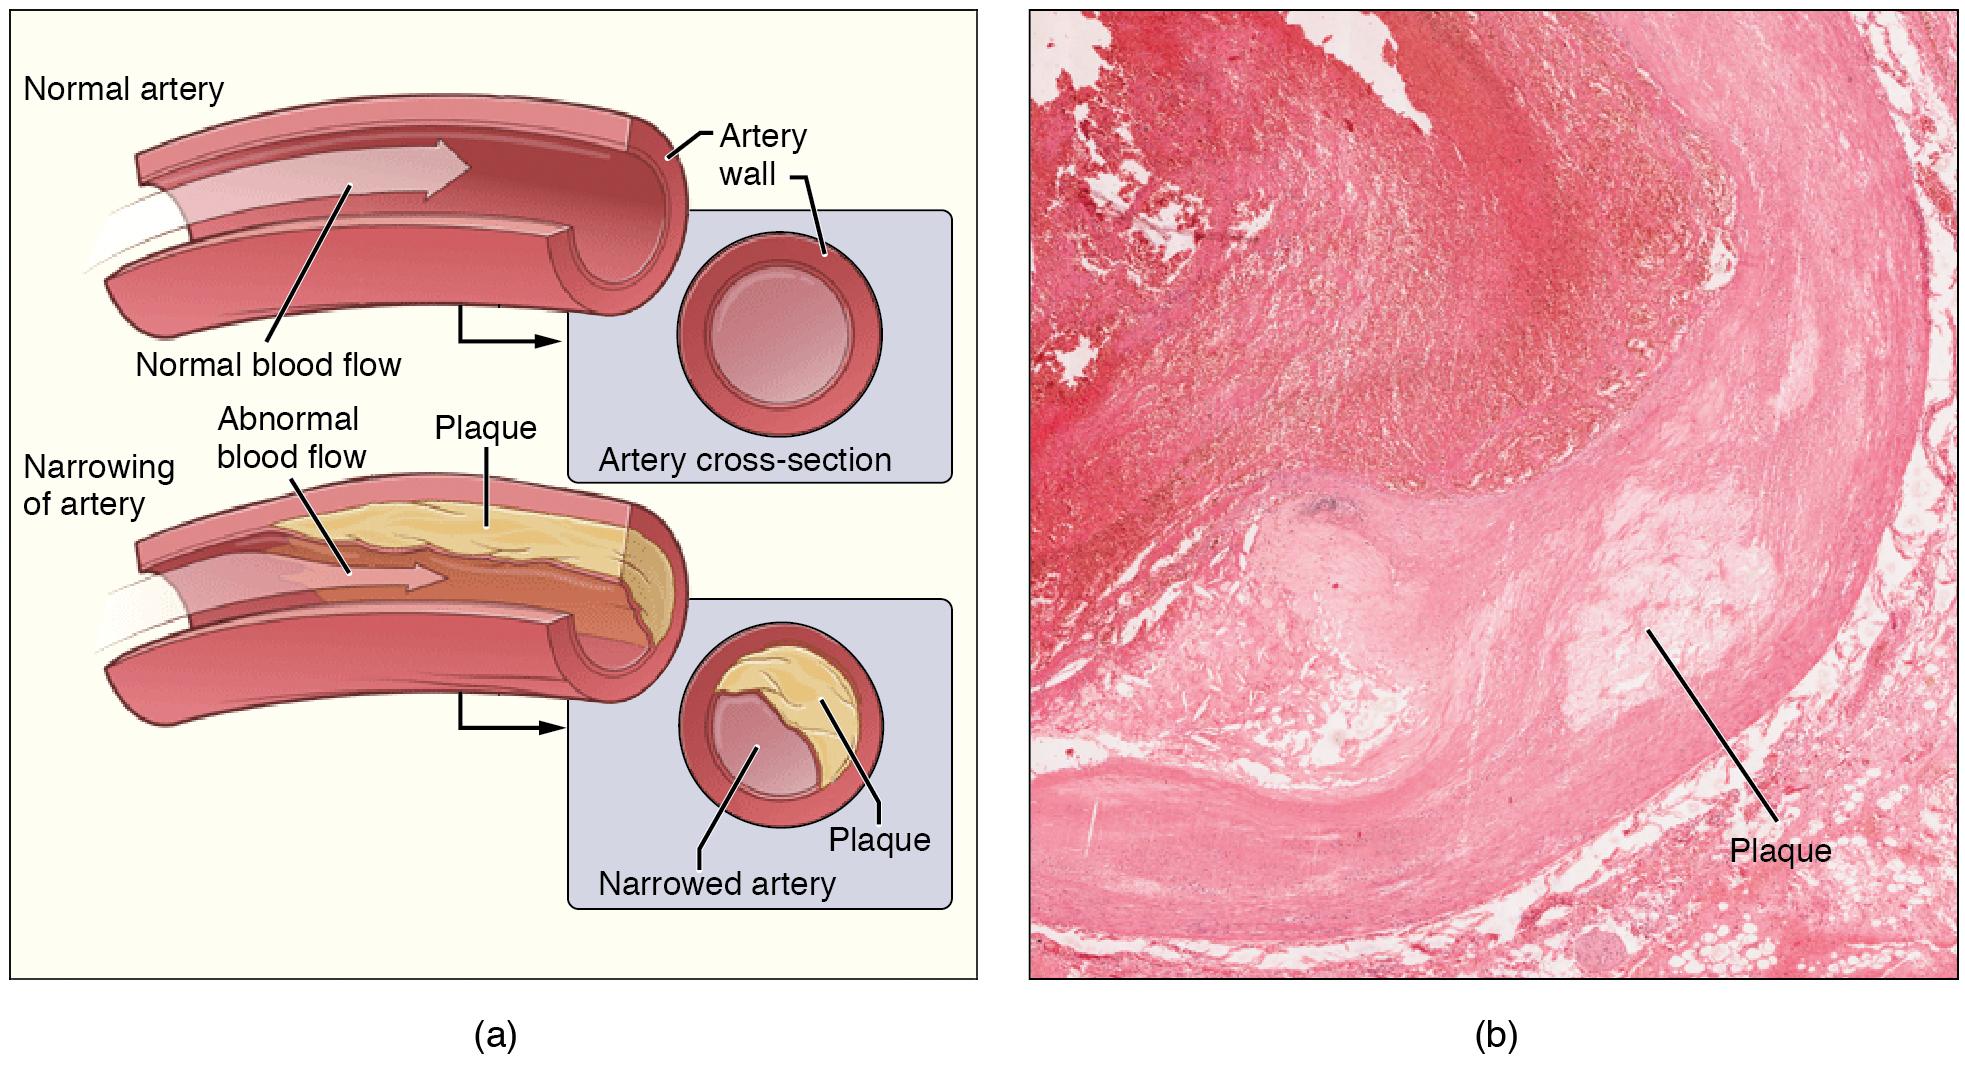 On the left is a cartoon showing a normal artery and one with atherosclerosis, in which a plaque has formed, impeding normal blood flow. On the right, a tissue section viewed under a microscope shows buildup of connective tissue in the artery wall